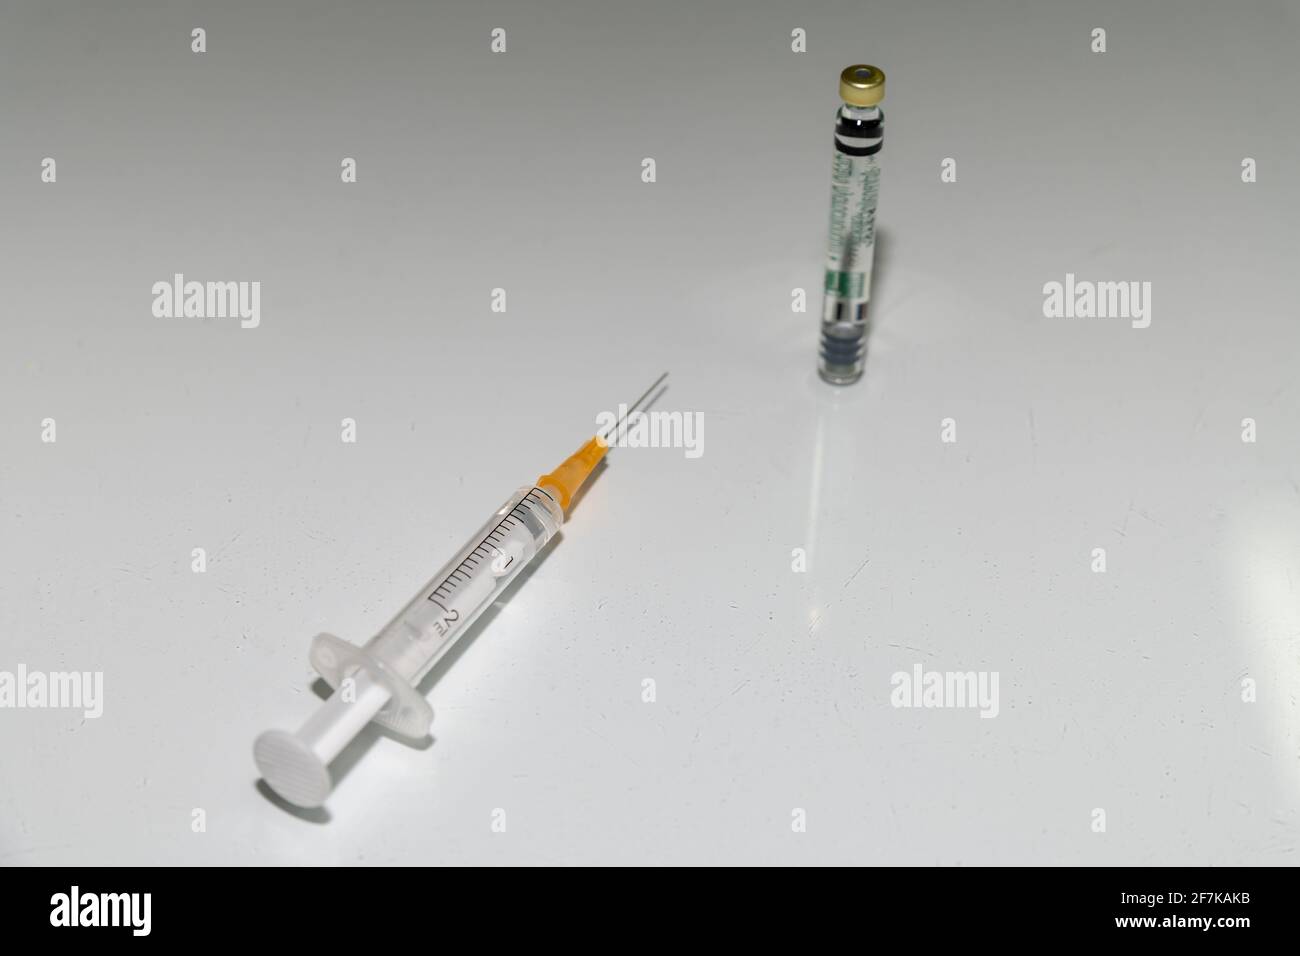 Syringe and needle with a dose of vaccine. Vaccine can against Corona, close-up on a white table. Stock Photo